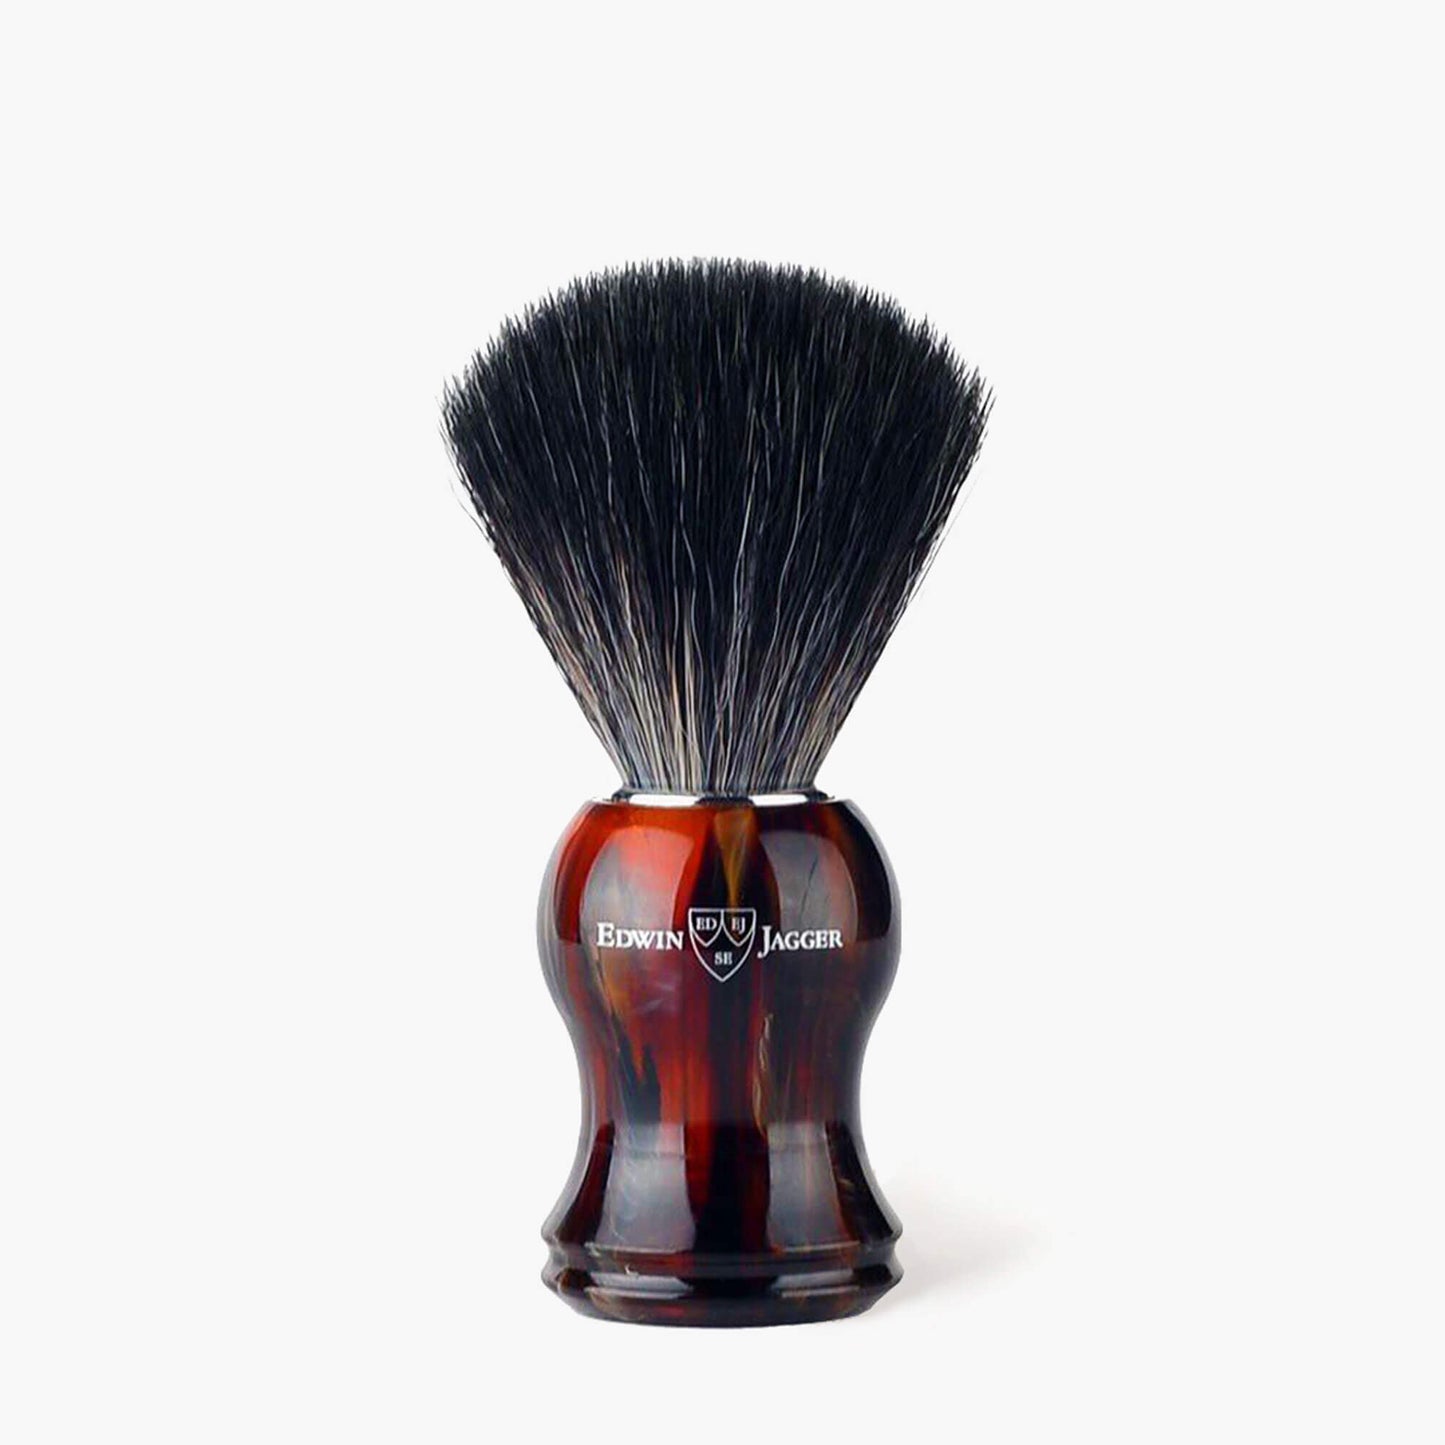 Edwin Jagger Synthetic Fibre Shaving Brush with Tortoise Shell Handle